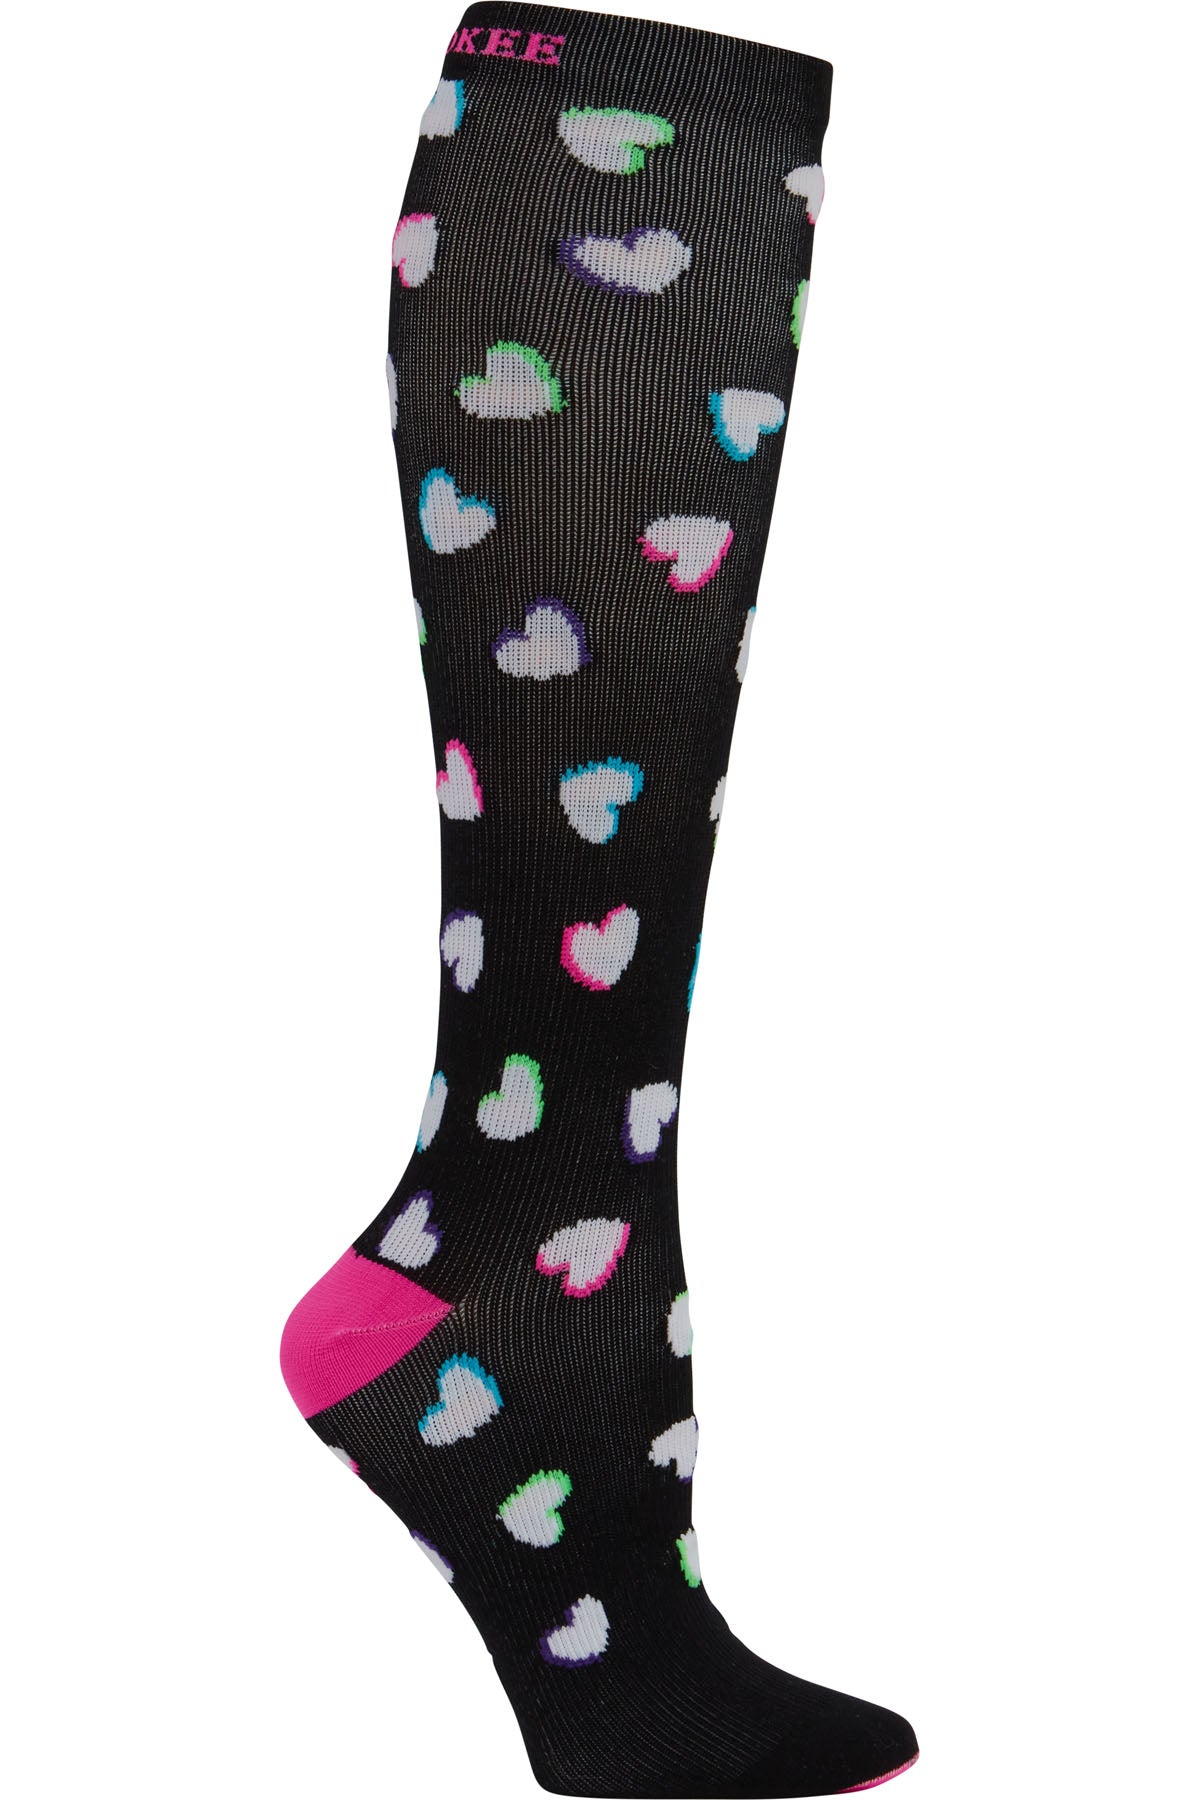 Cherokee Plus Print Support Mild Compression Socks Extra Wide Calf 10-15 mmHg Neon Hearts at Parker's Clothing and Shoes.